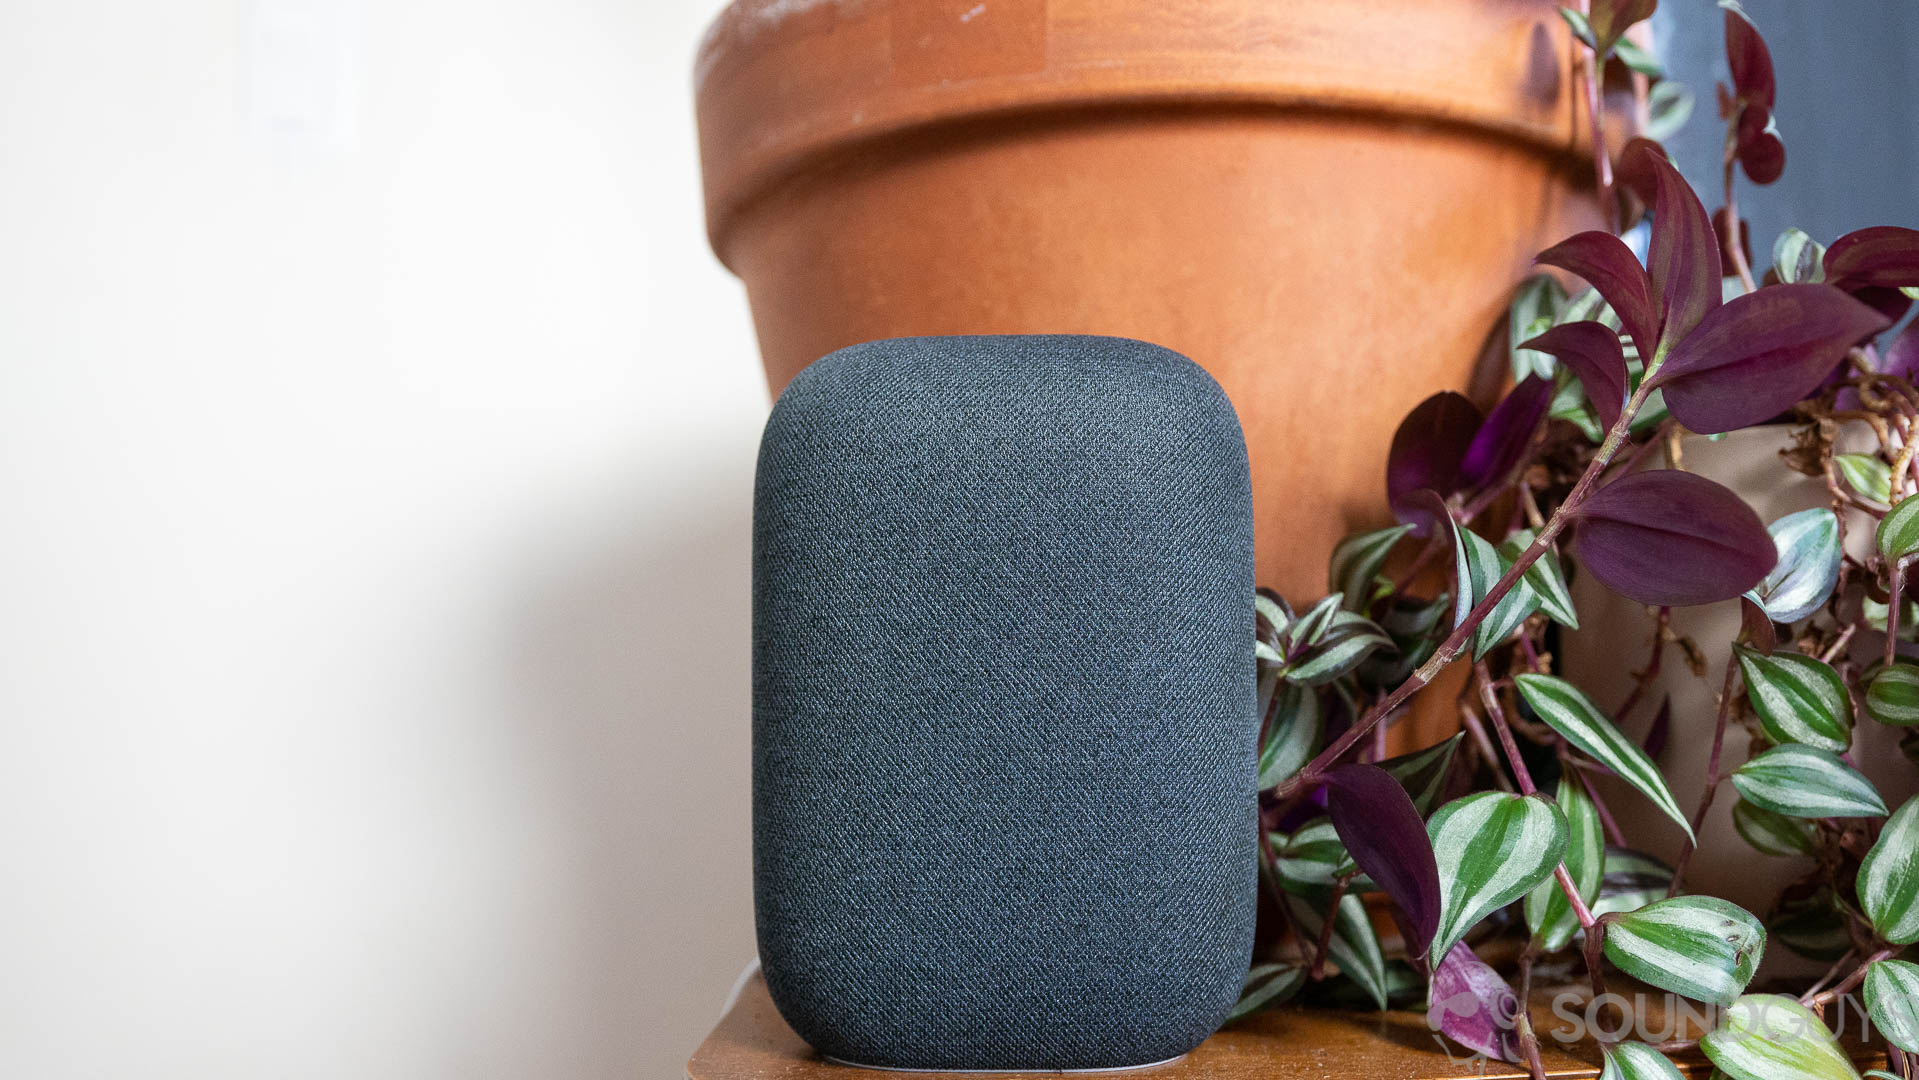 The Google Nest Audio speaker in gray pictured in front of plants on a table